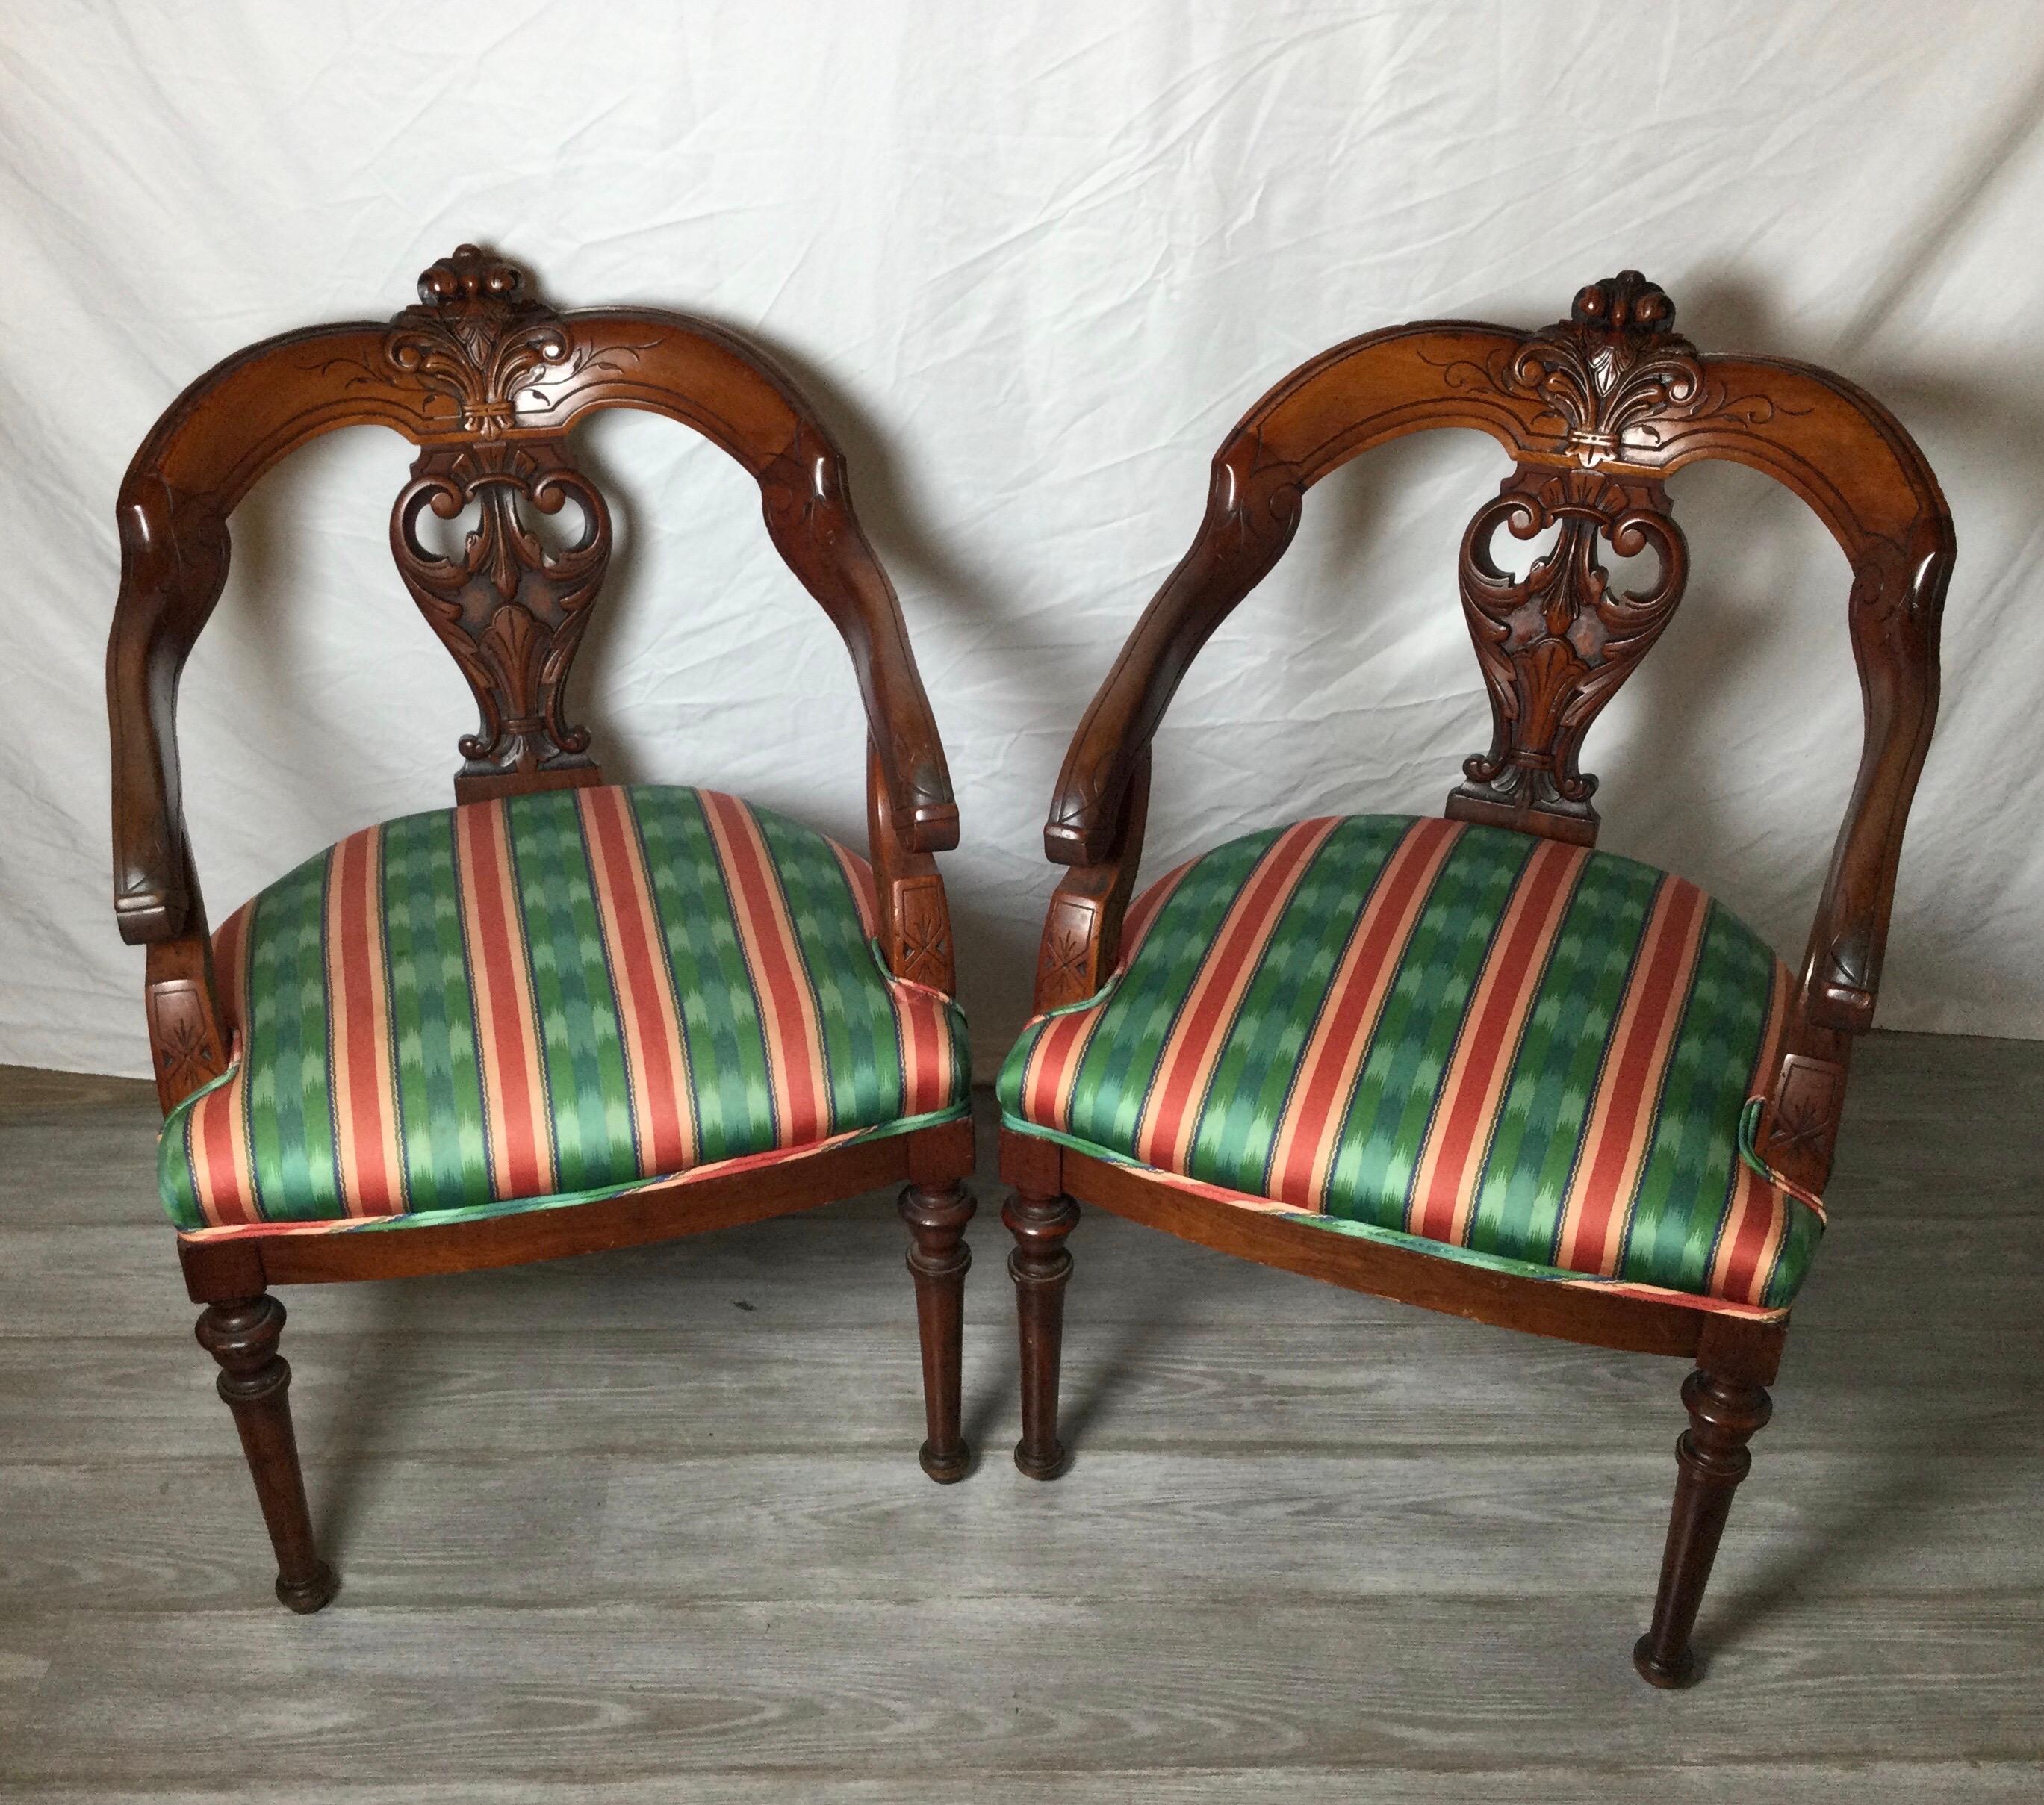 A pair of hand carved walnut rounded back armchairs with new upholstered seat. The chairs with a warm age patination to the wood with hand carved backs.